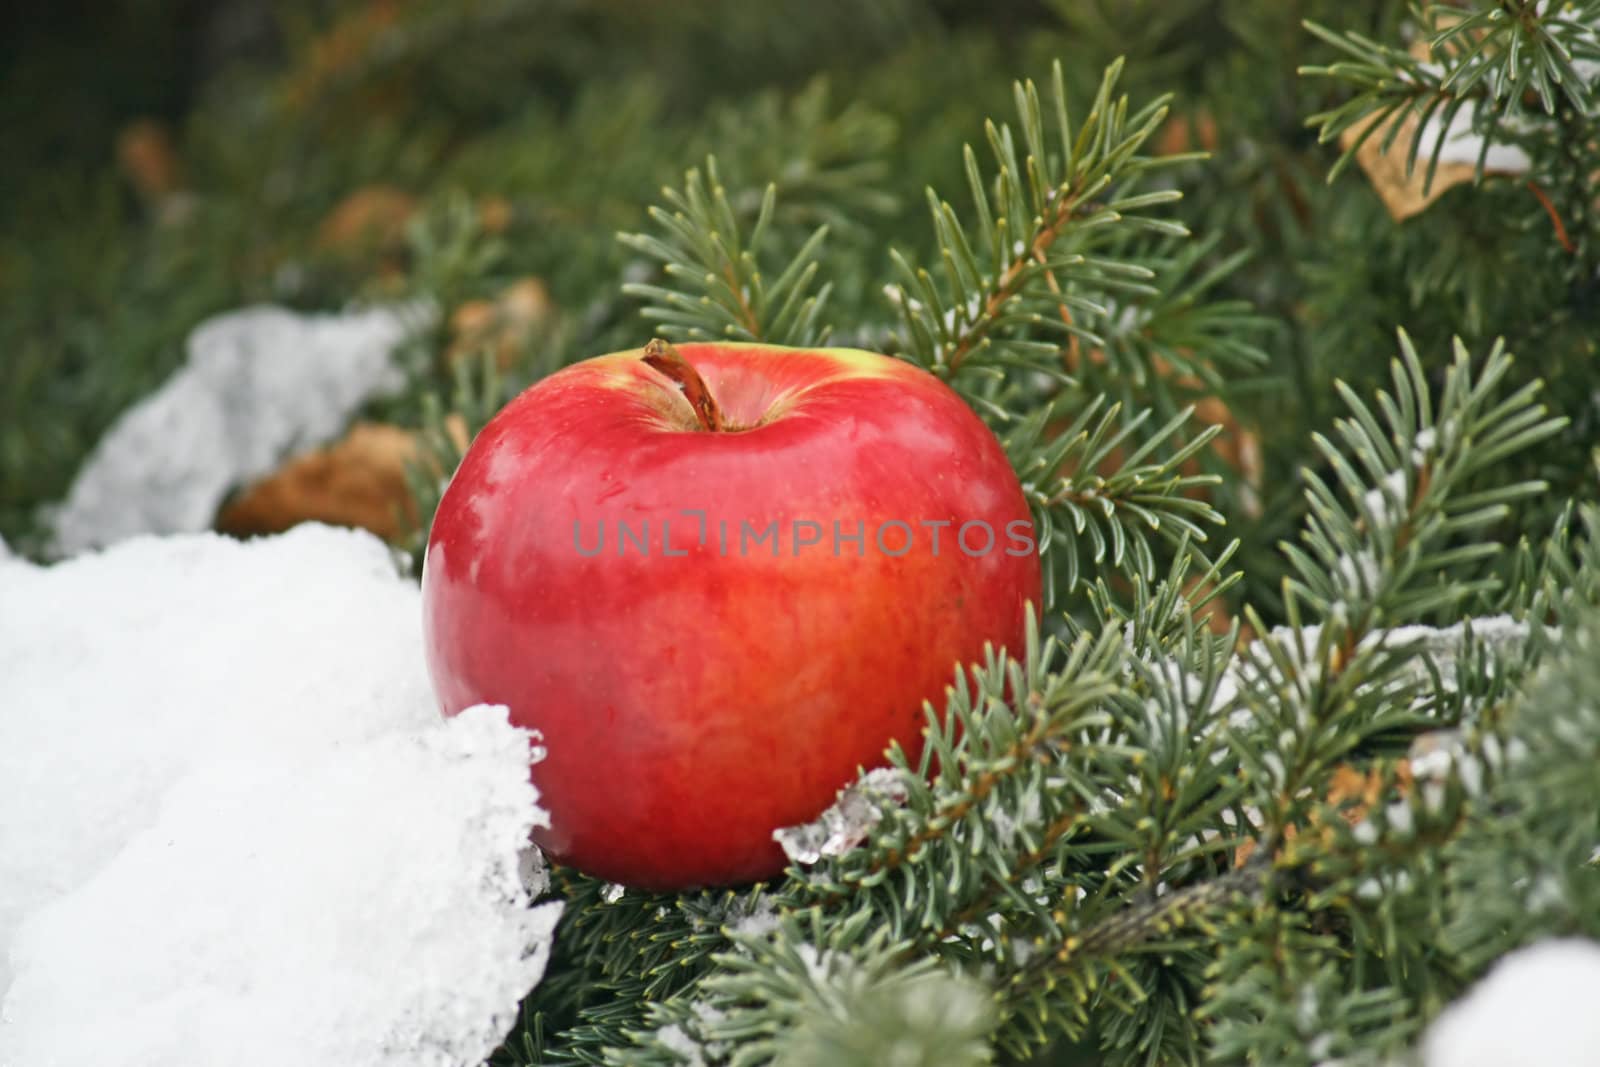 On a green branch of a pine the beautiful red apple lies. Nearby among needles the heap of snow is visible.
